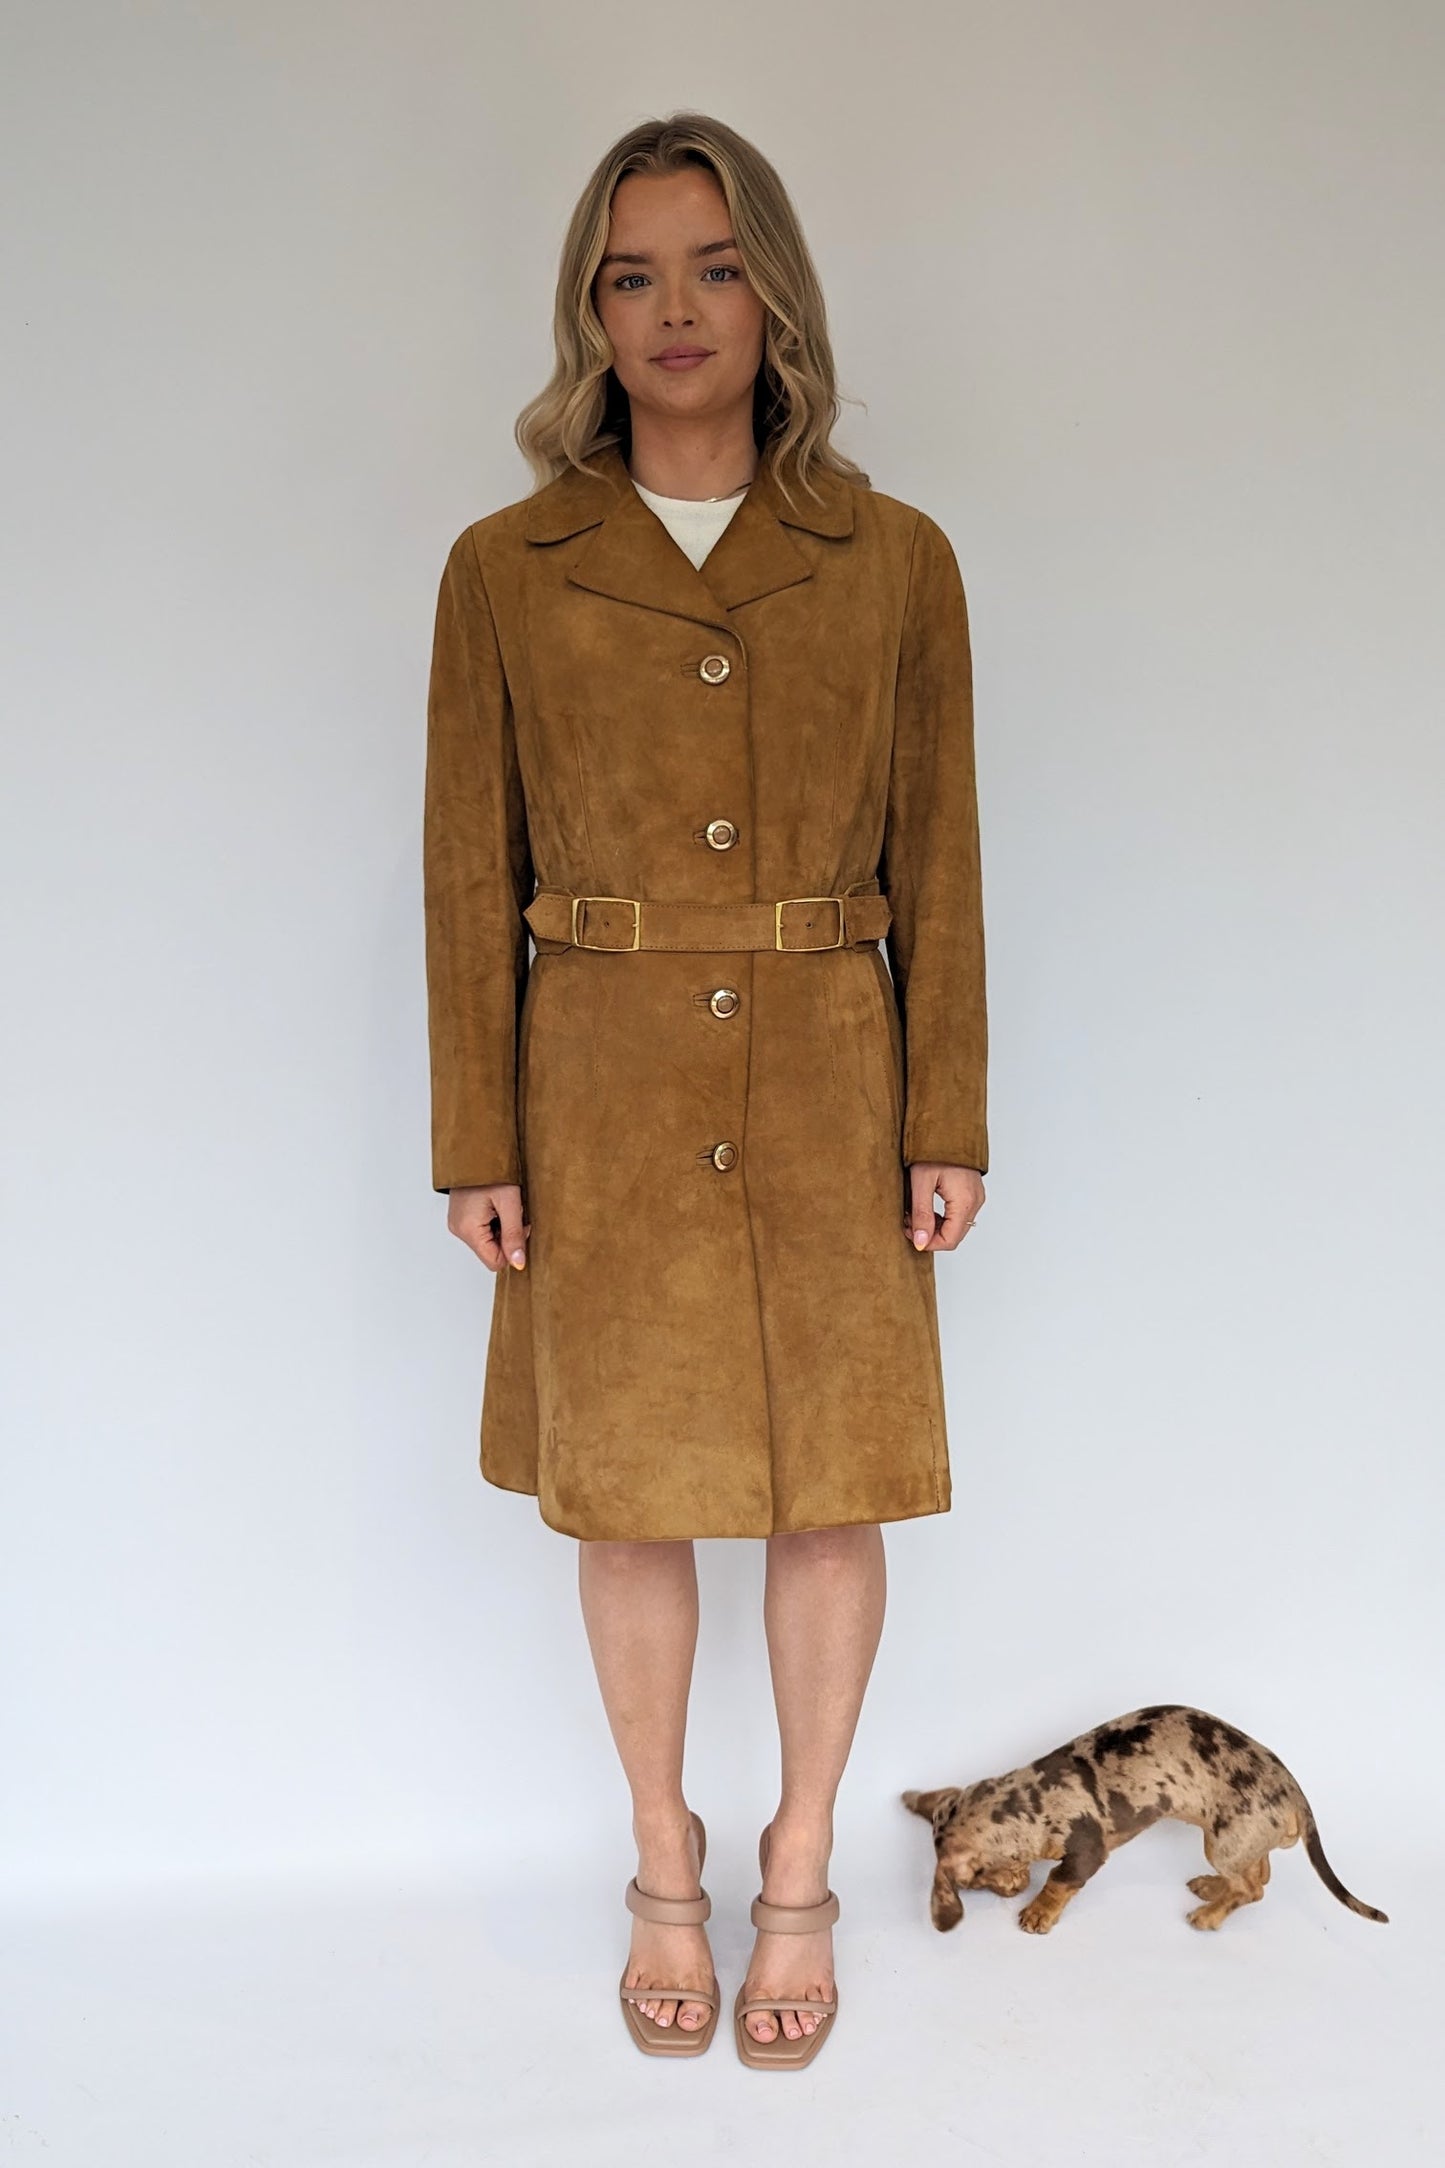 70s long tan suede ladies coat with gold buttons and gold buckled belt